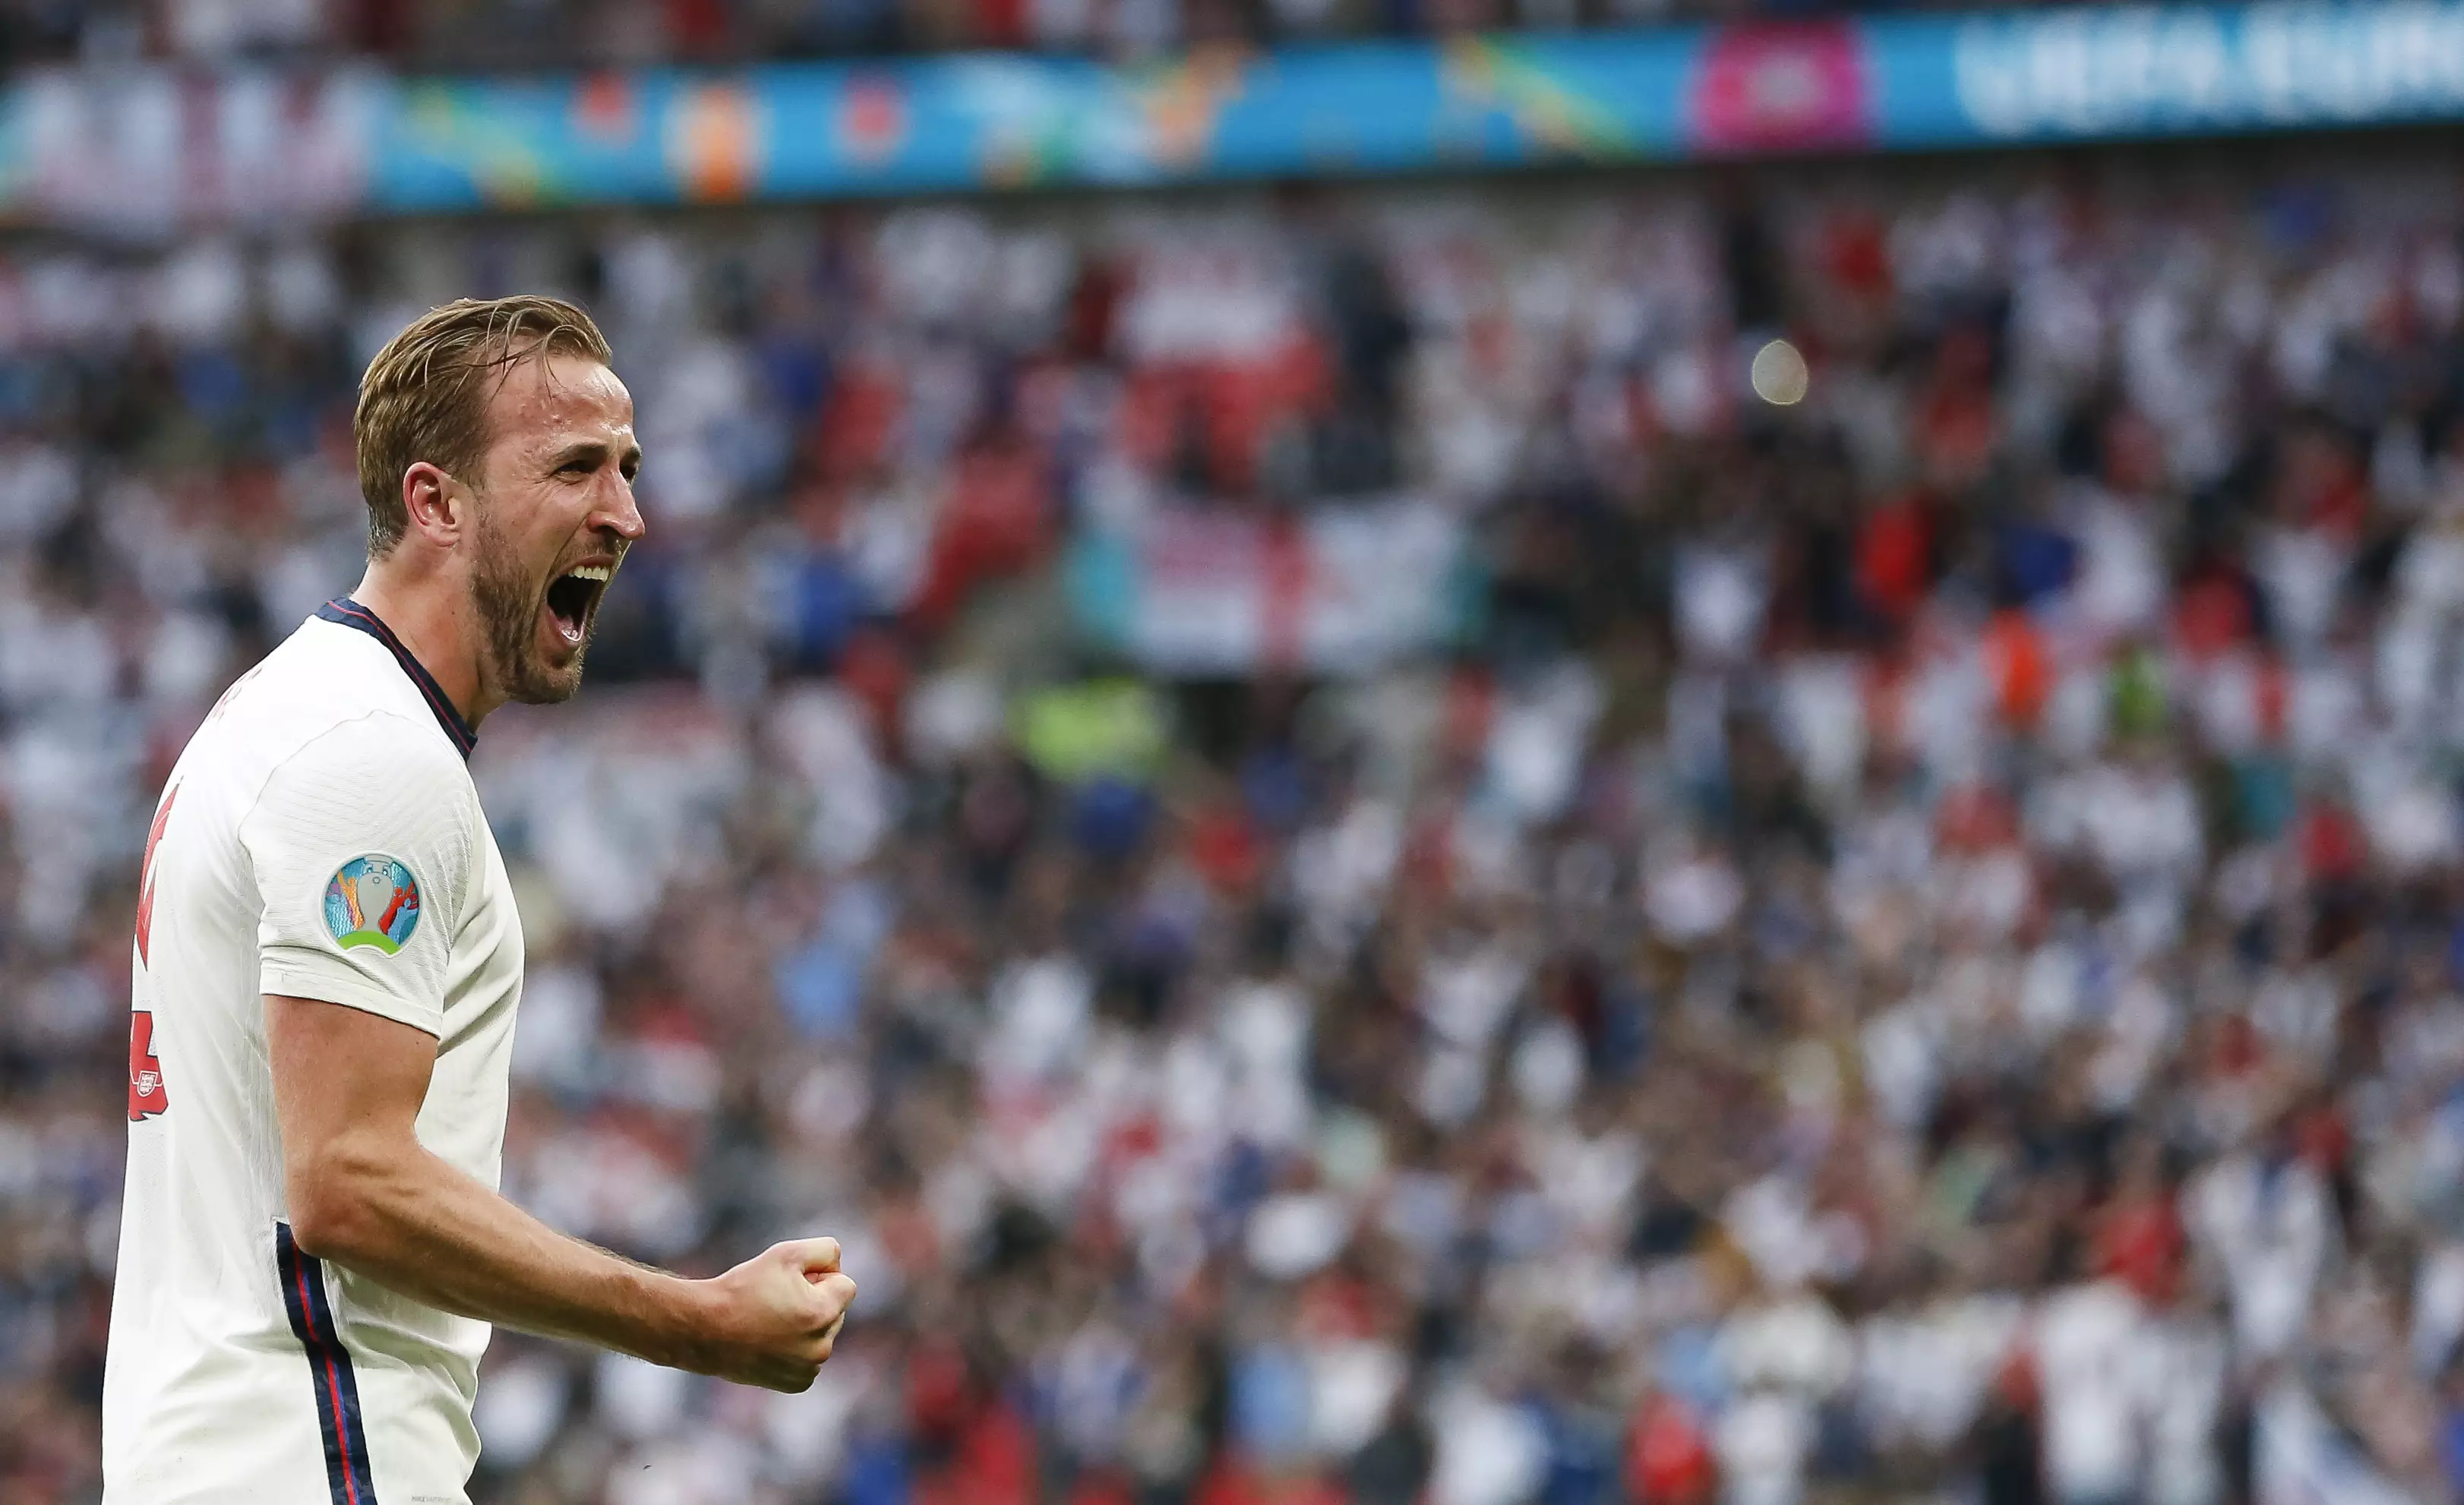 Harry Kane scored his first goal of the European Championships against Germany on Tuesday.